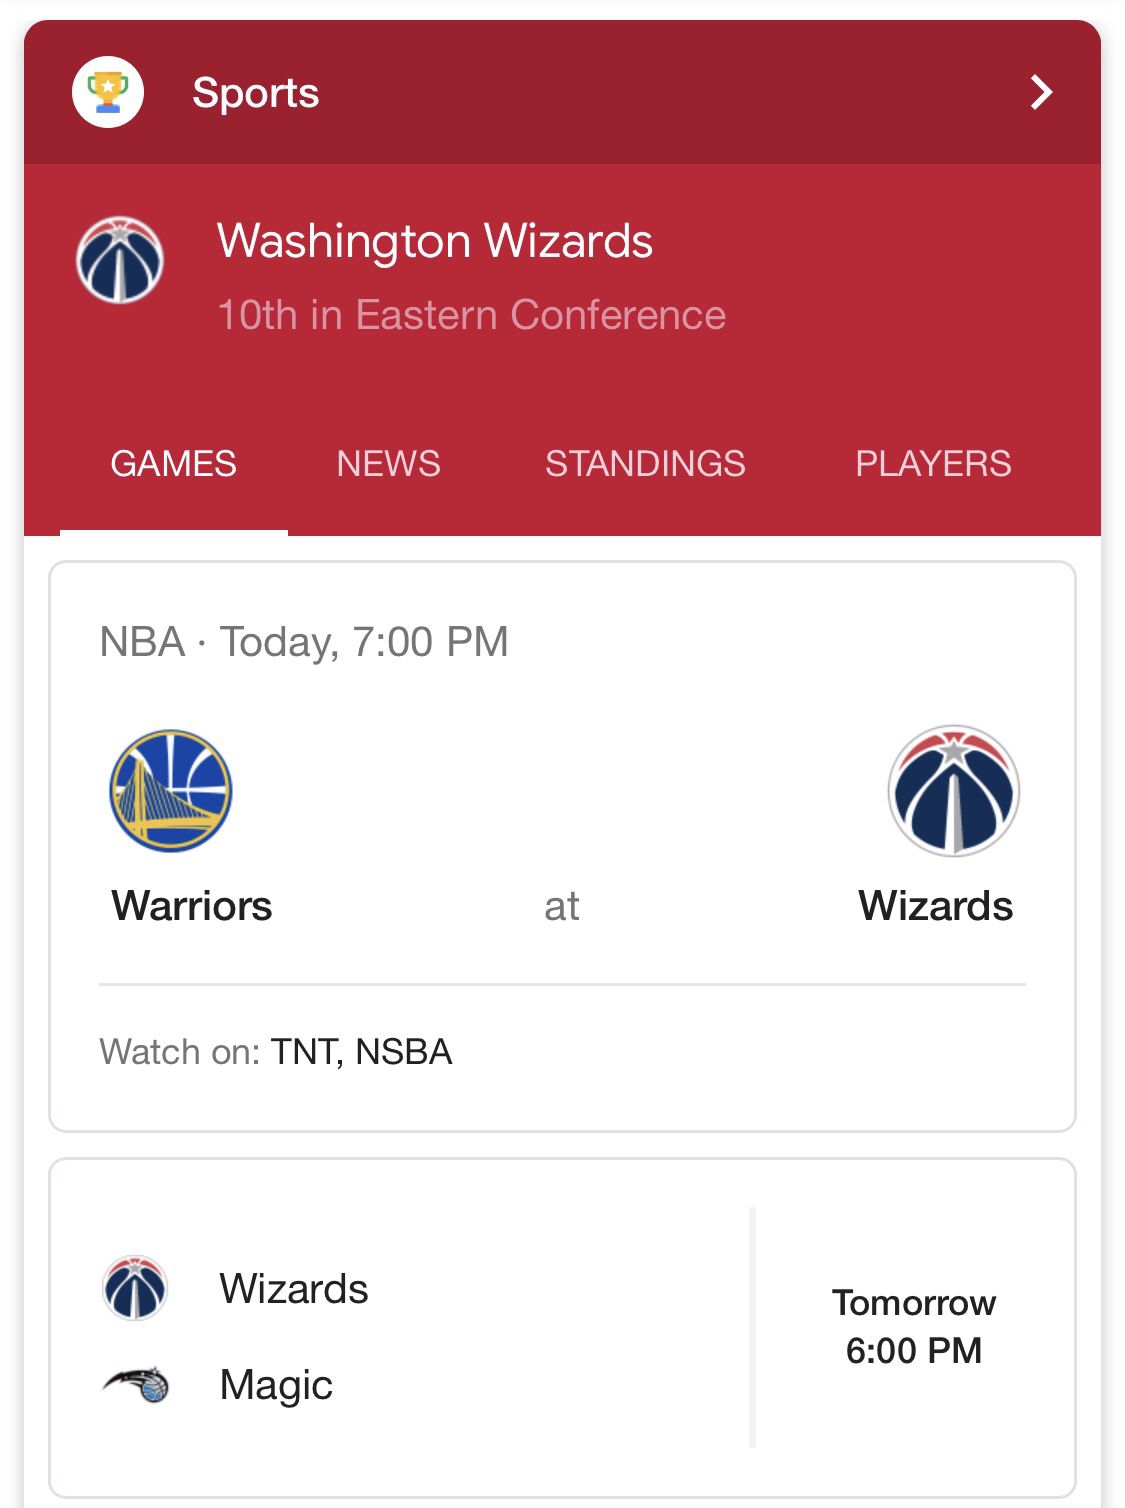 Wizards Vs Warriors Lower Level Game Tickets. Sec 109